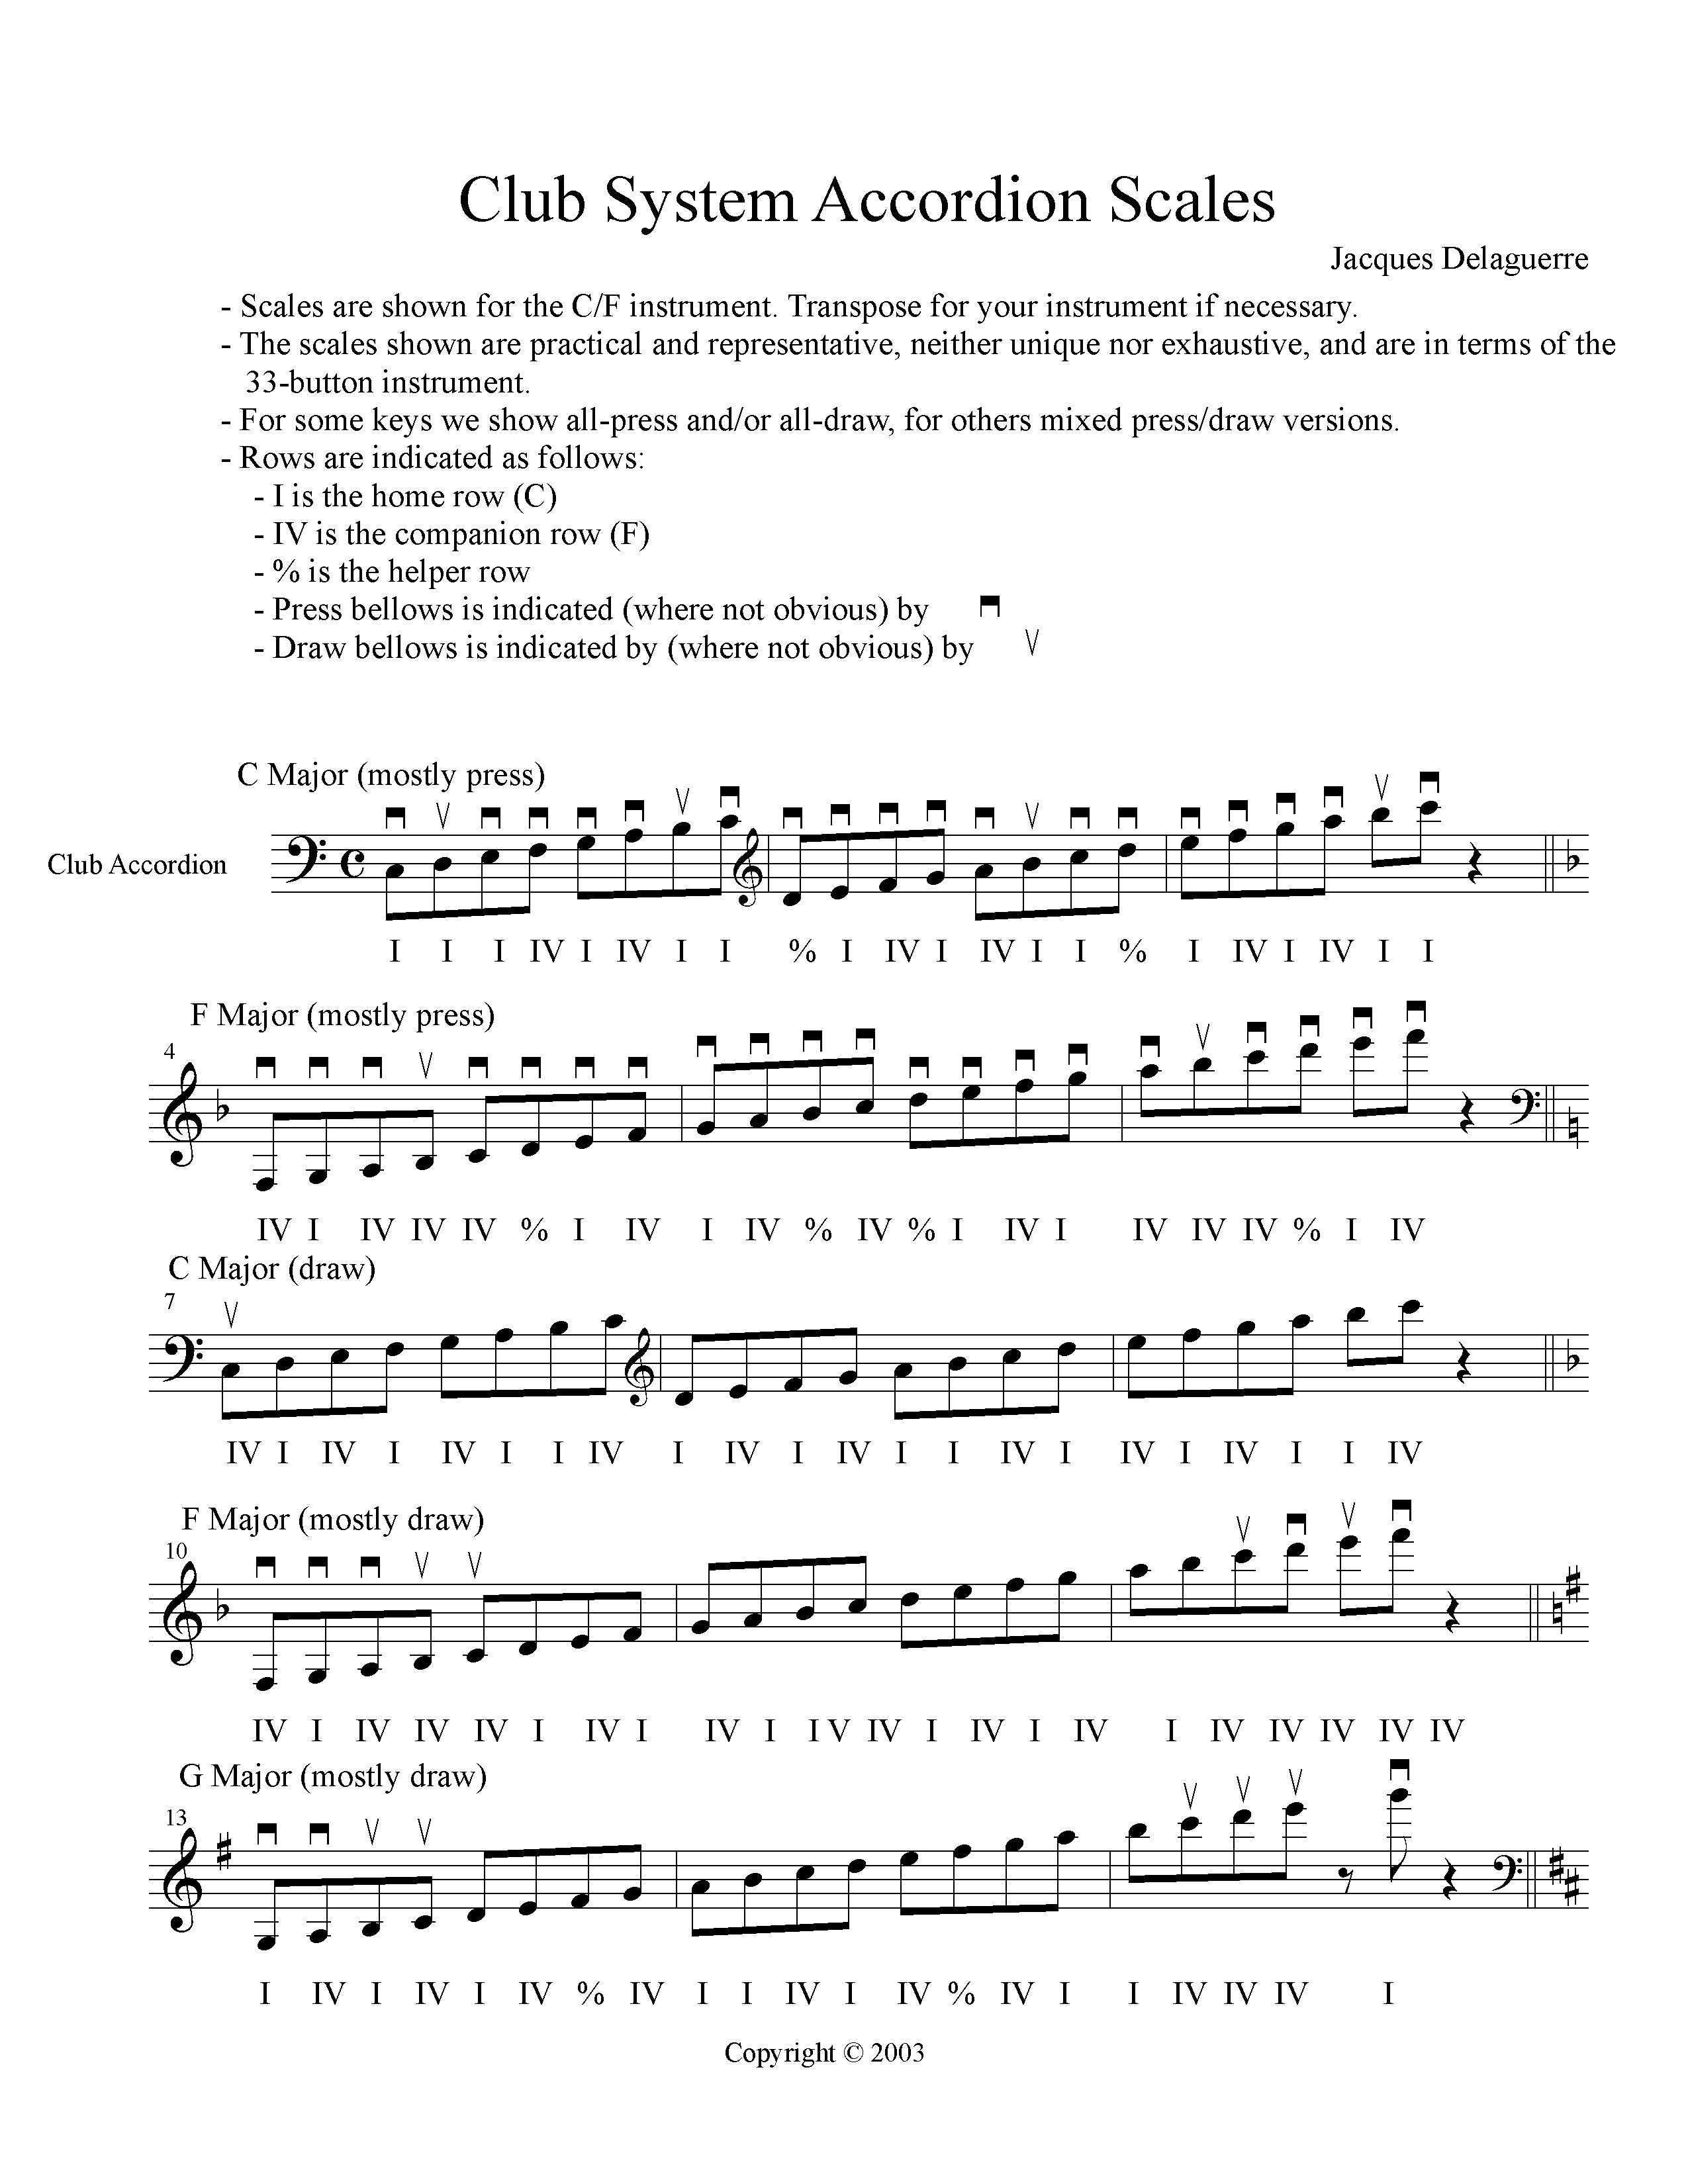 [Major scales for Club System Accordion pg. 1/2] 